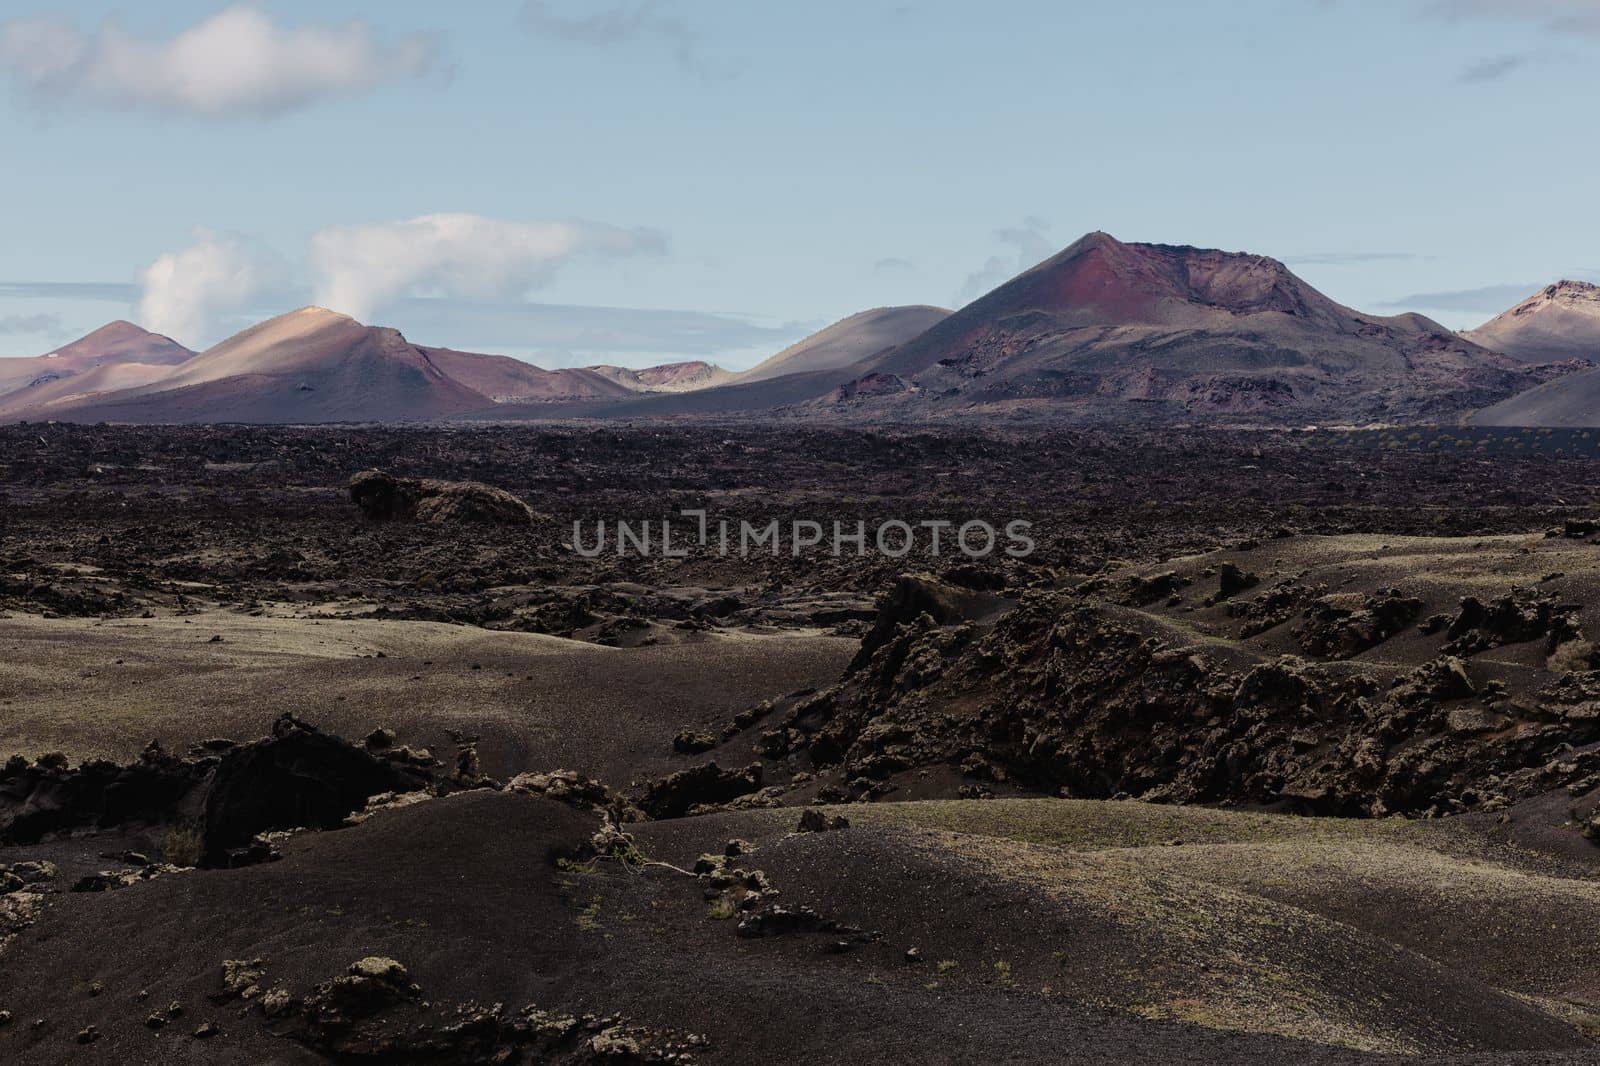 Black volcanic landscape of Timanfaya National Park in Lanzarote. Popular touristic attraction in Lanzarote island, Canary Islands, Spain. by kasto